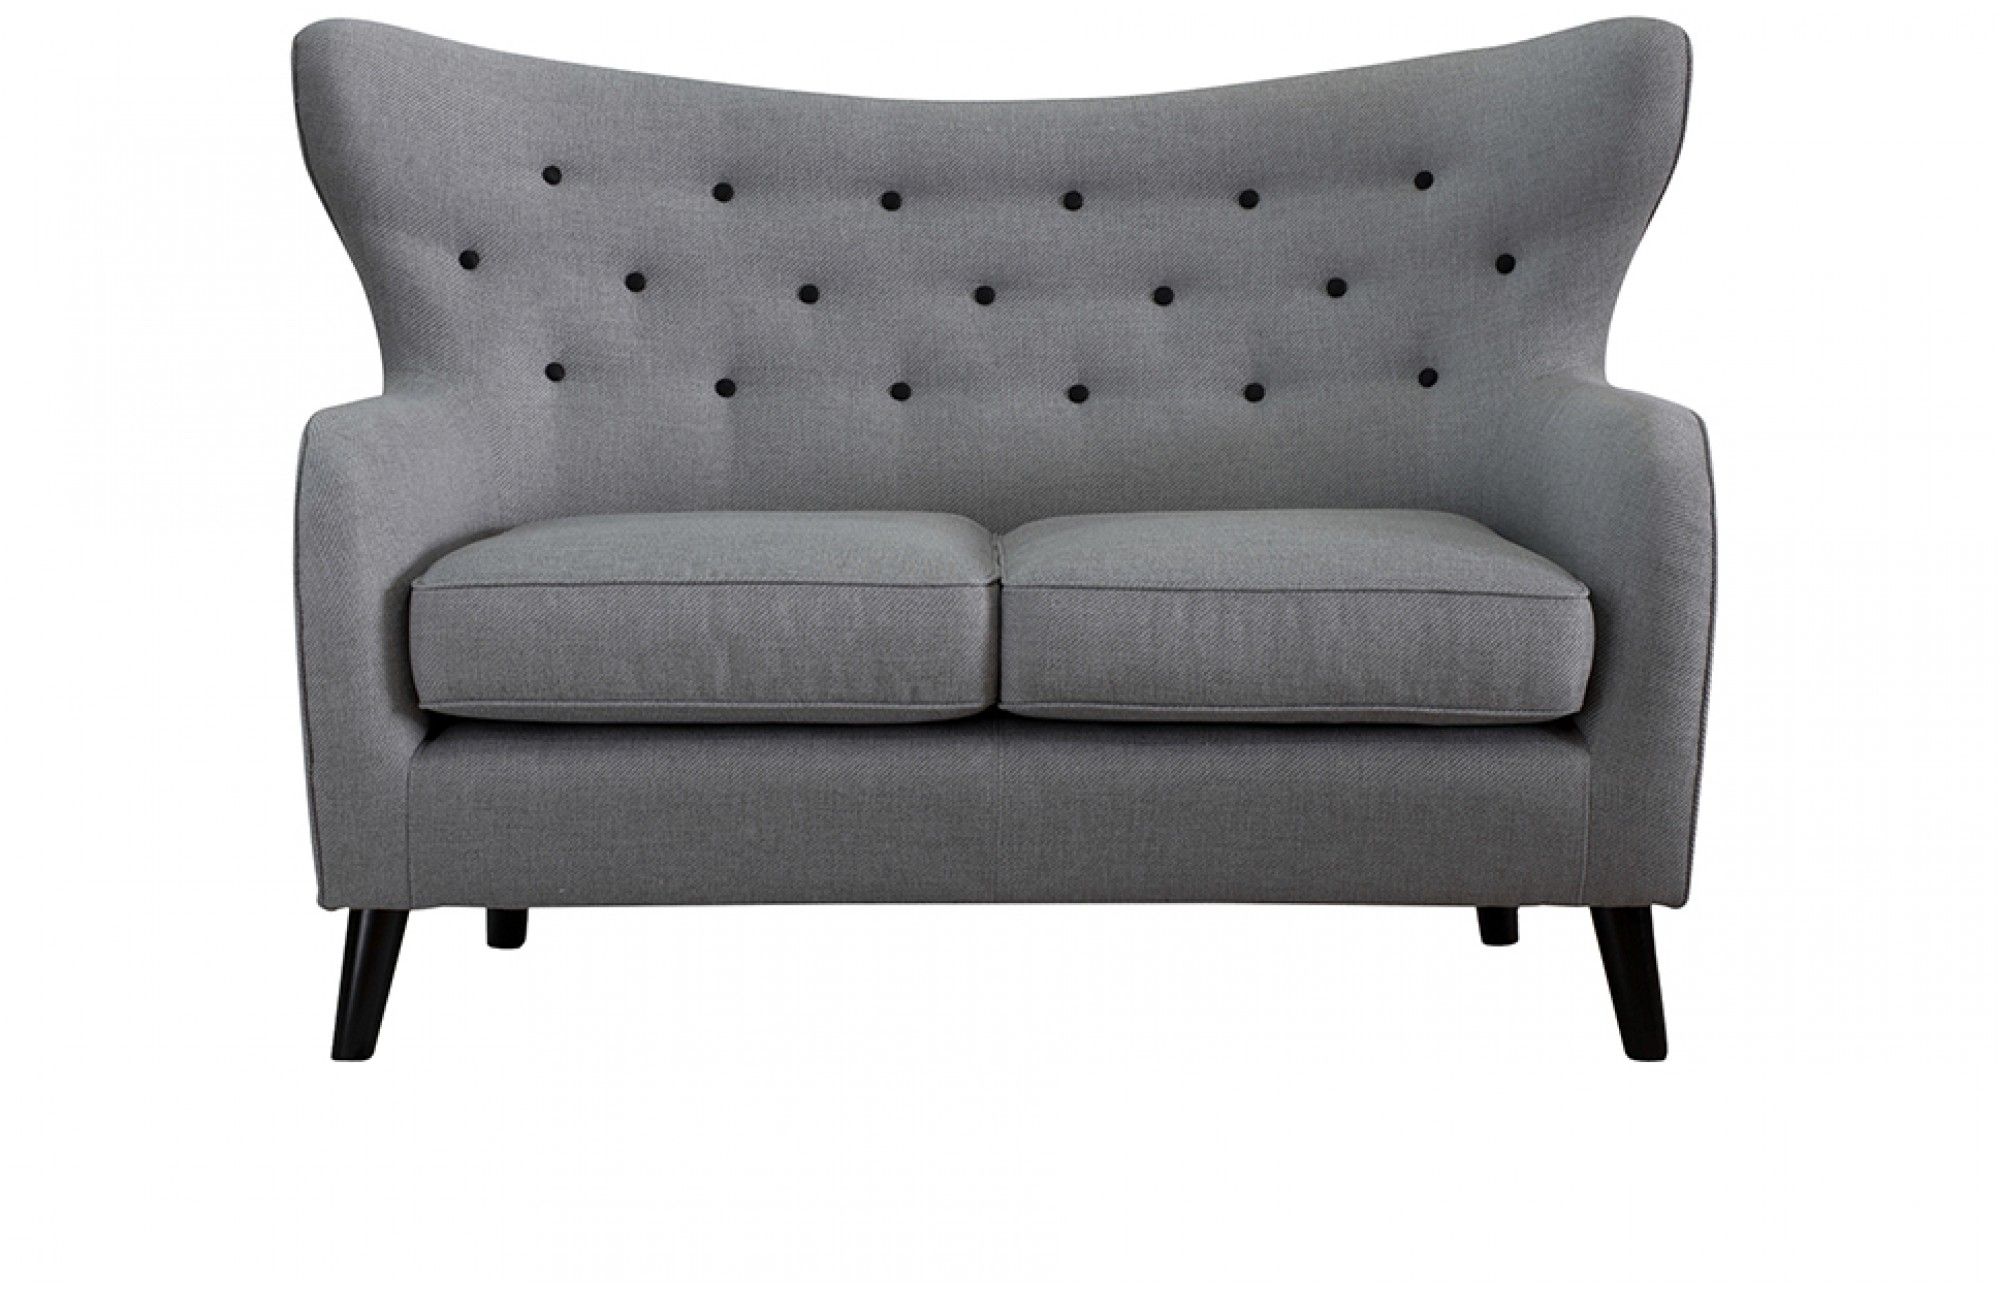 Wilfred Two Seater Sofa In Stone Grey Out And Out Original Regarding Two Seater Chairs (View 10 of 15)